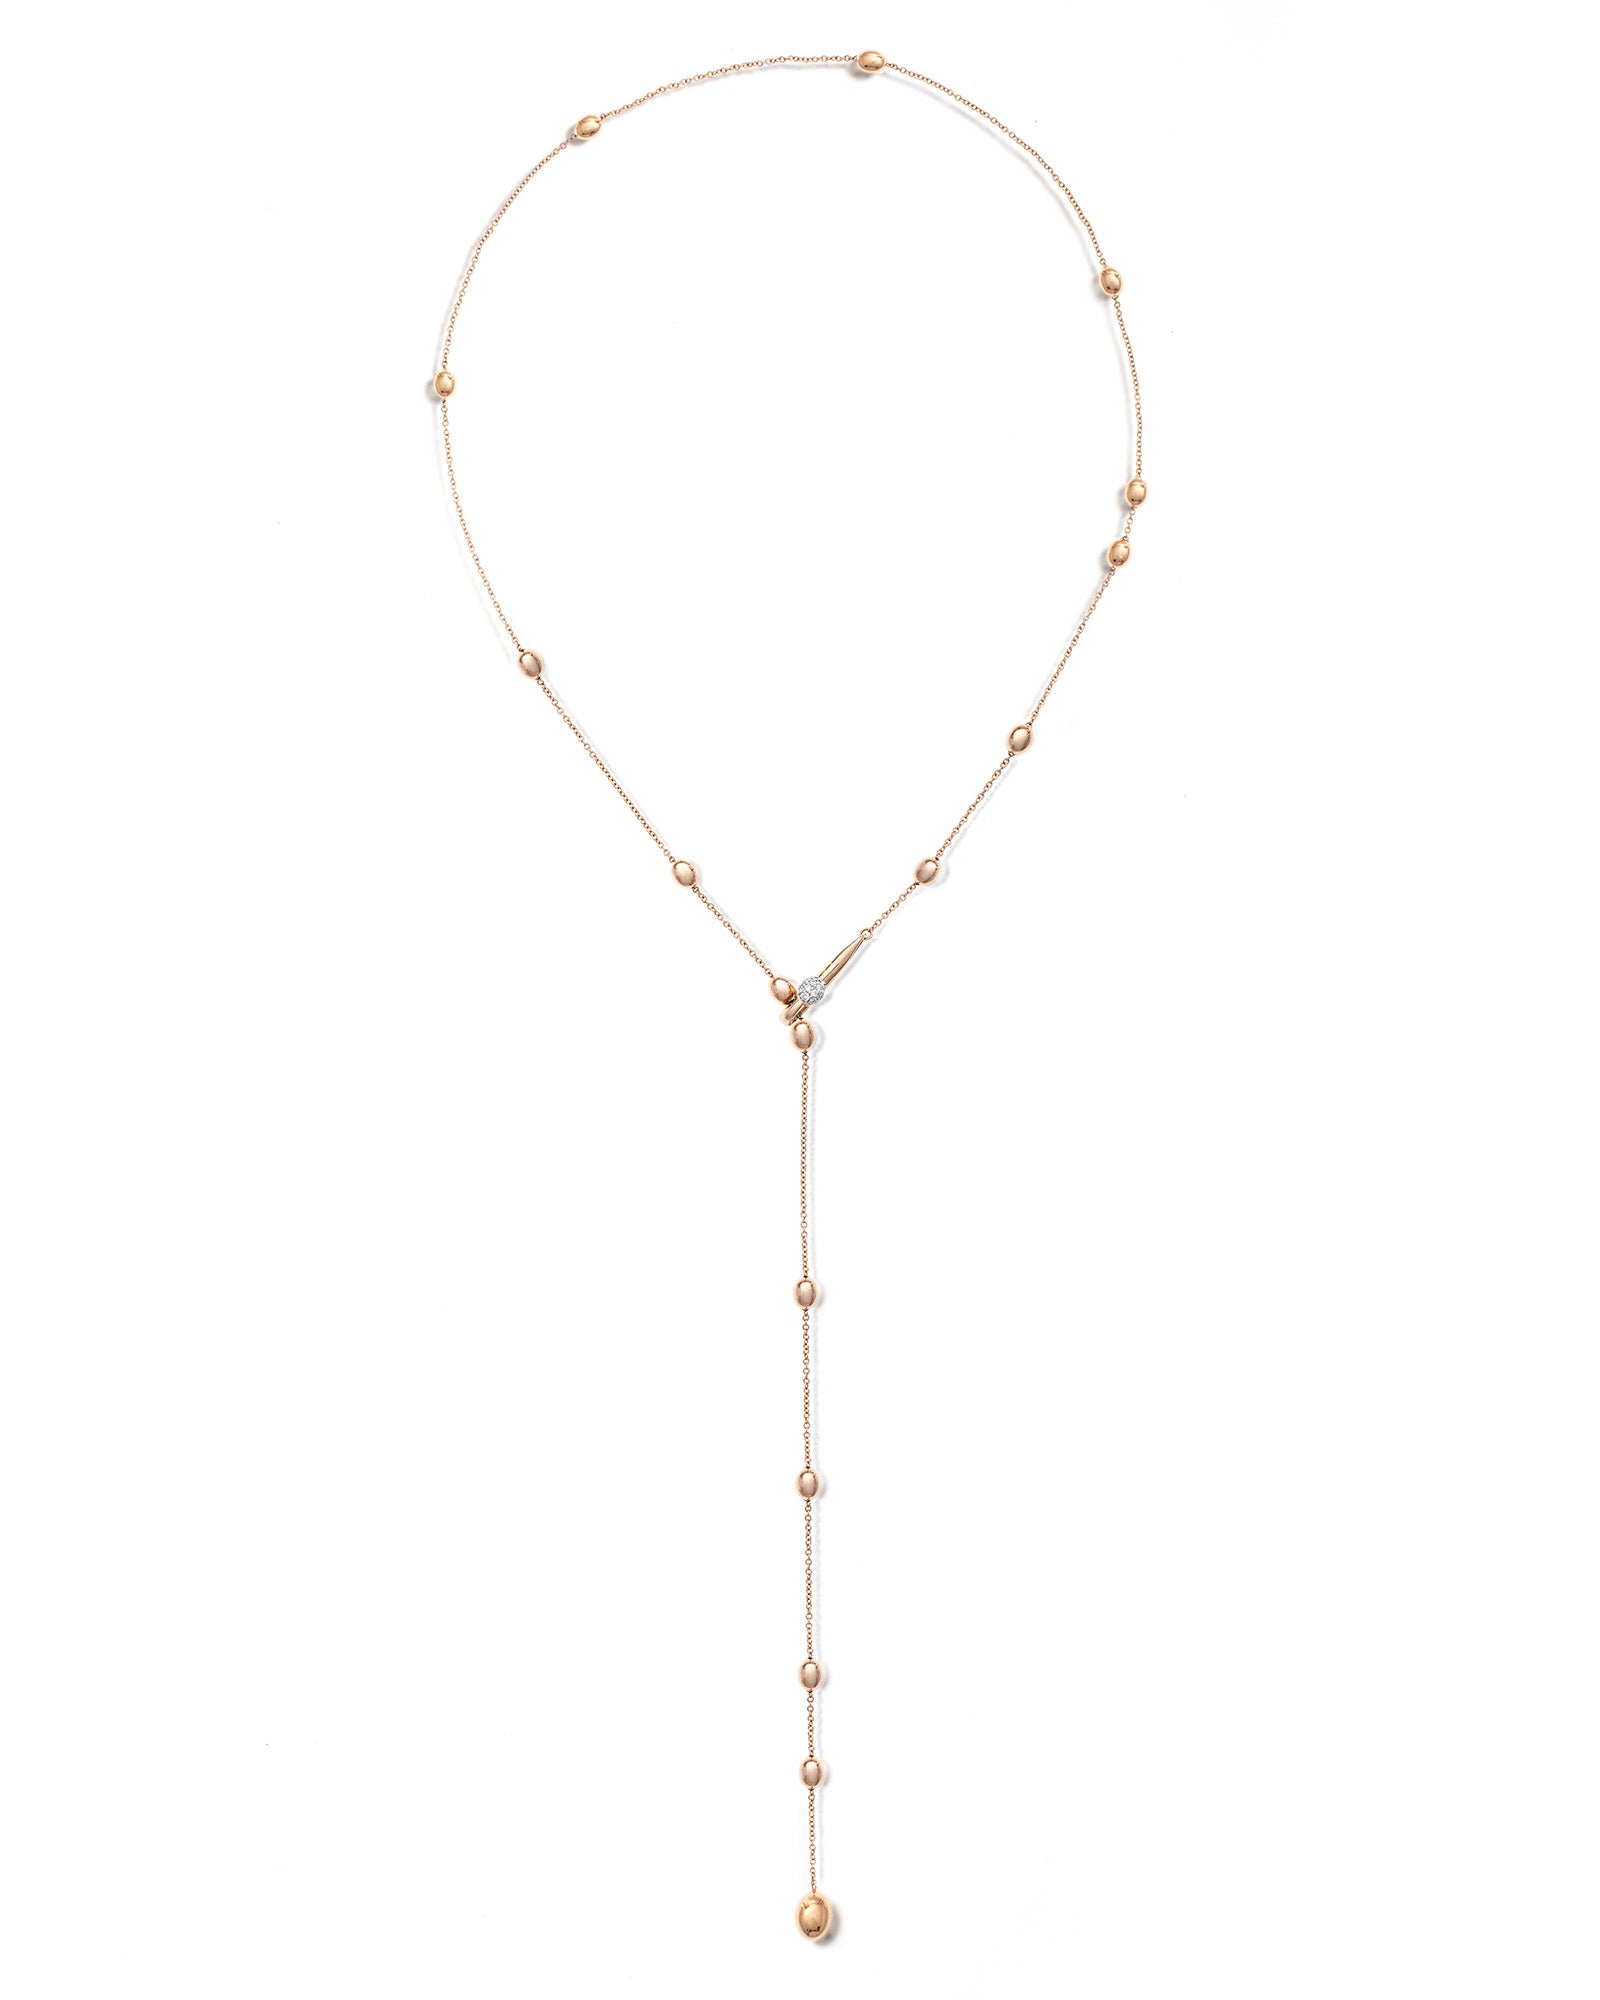 "Soffio" rose gold and diamonds y necklace